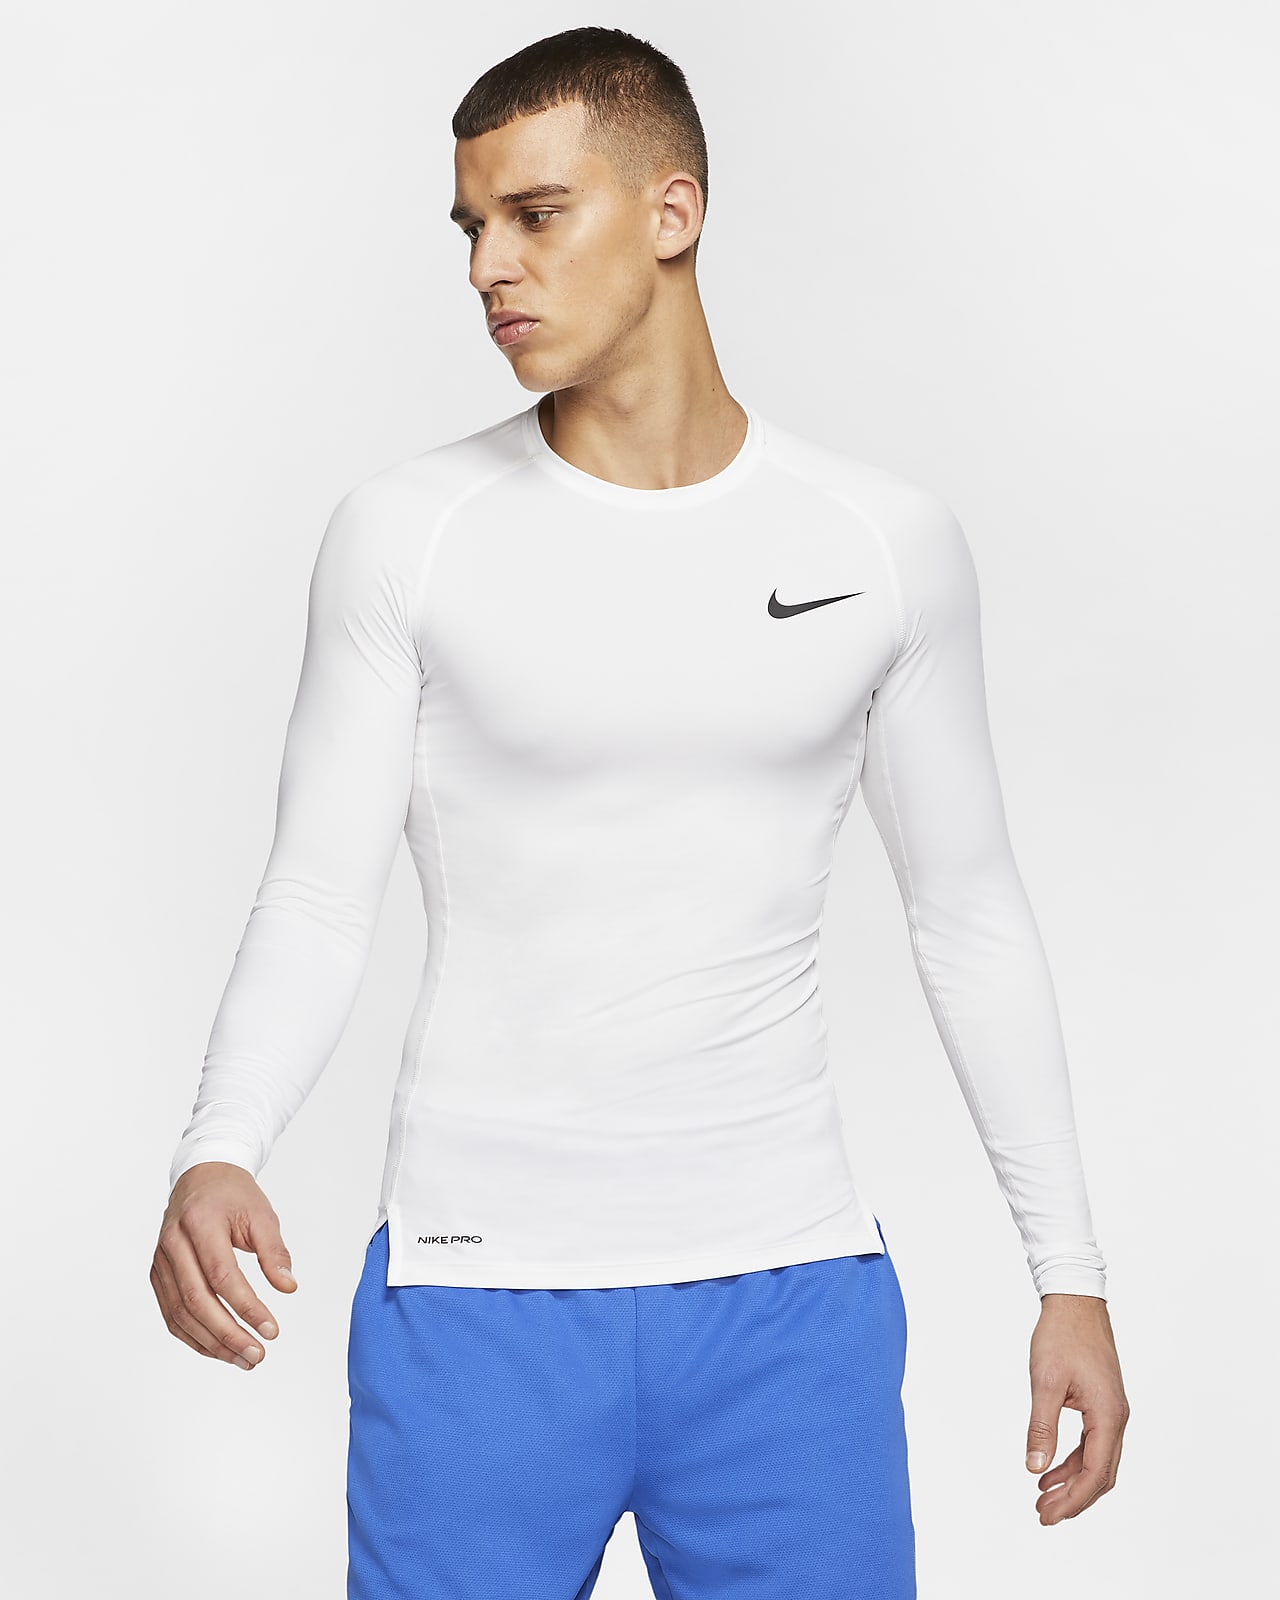 Nike Pro Men's Tight Fit Long-Sleeve Top